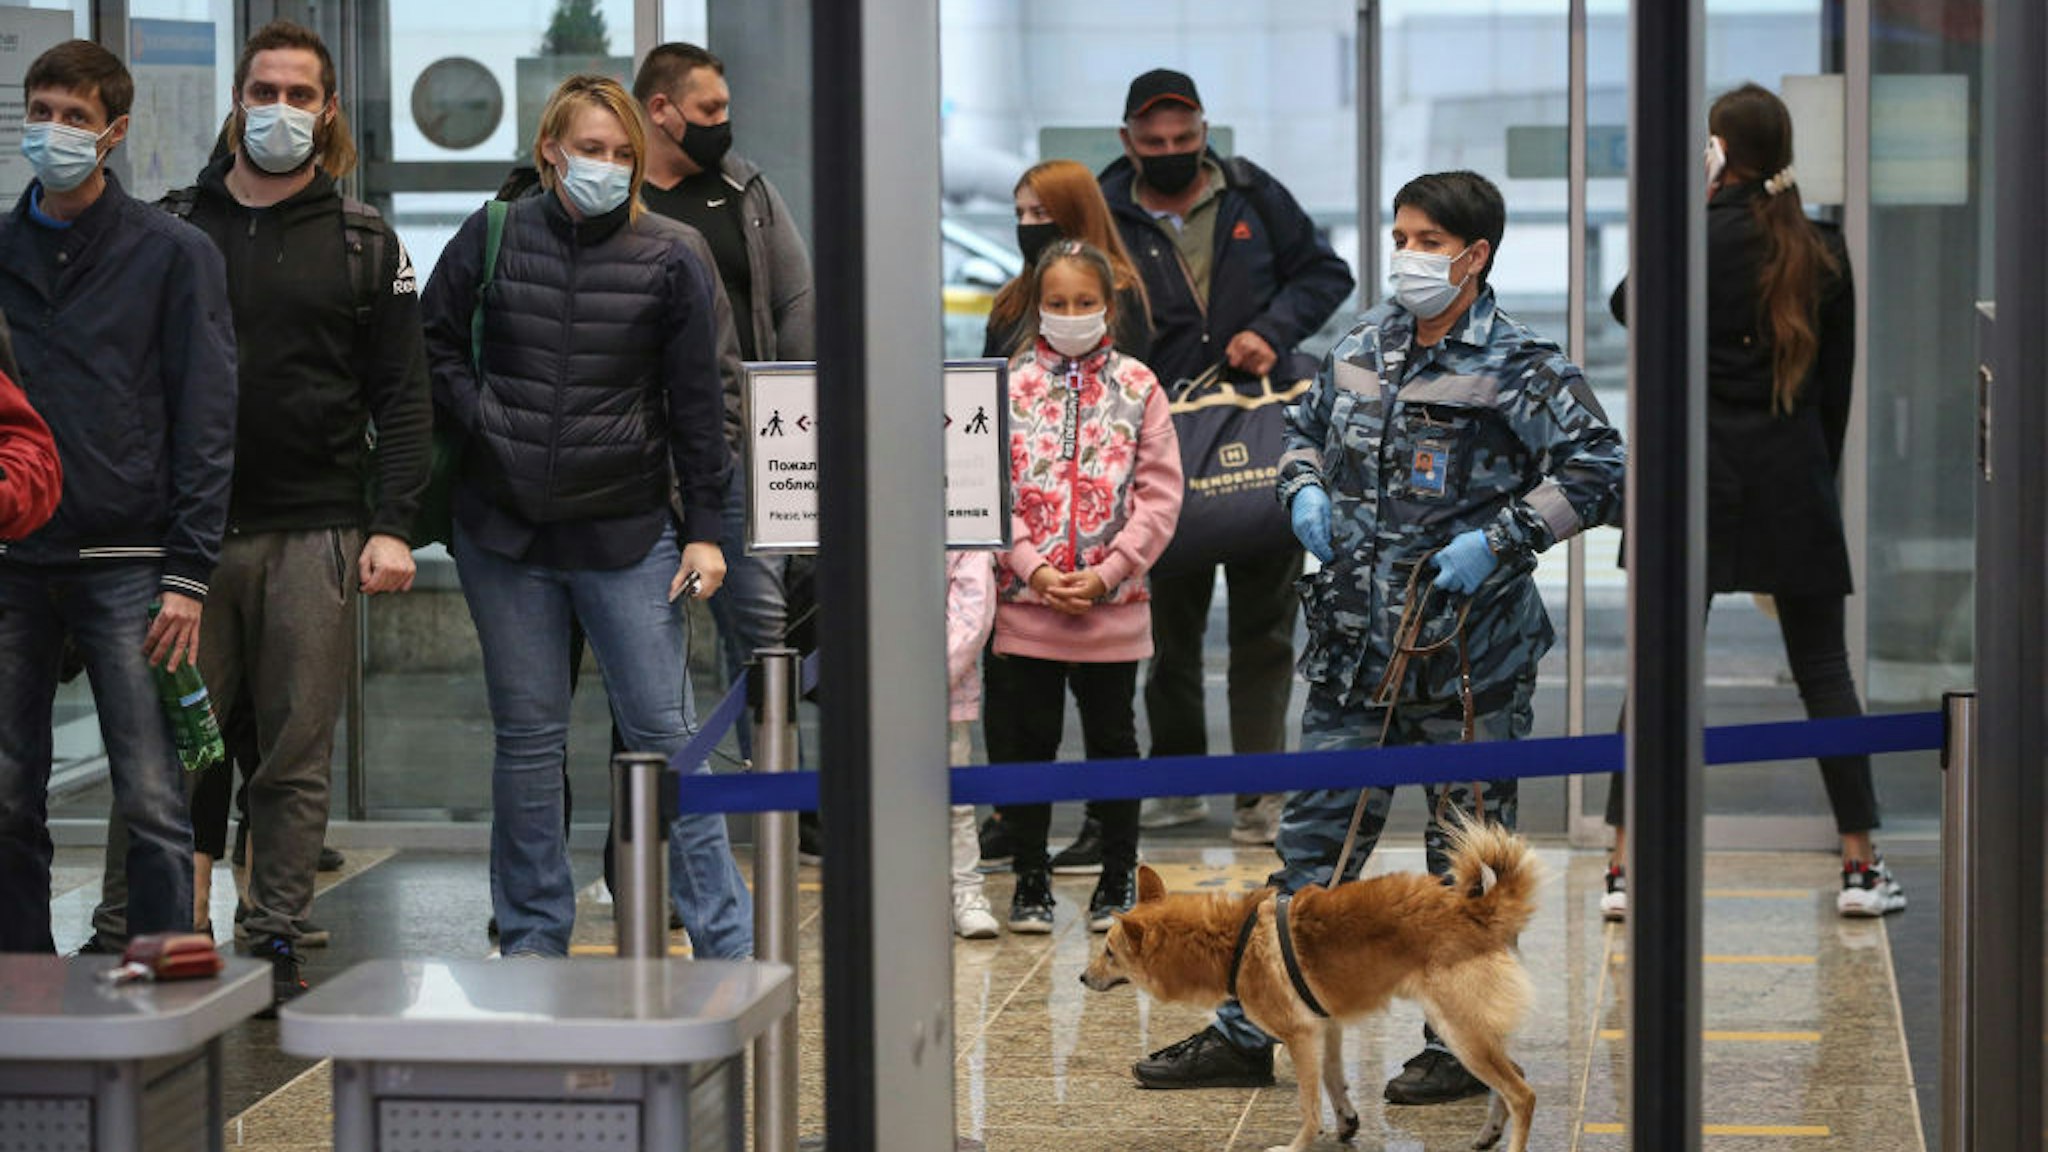 An employee handles a sniffer dog during an explosive material detection patrol by the passenger security check queue in the departures terminal at Sheremetyevo International Airport OAO in Moscow, Russia, on Friday, Oct. 9, 2020.